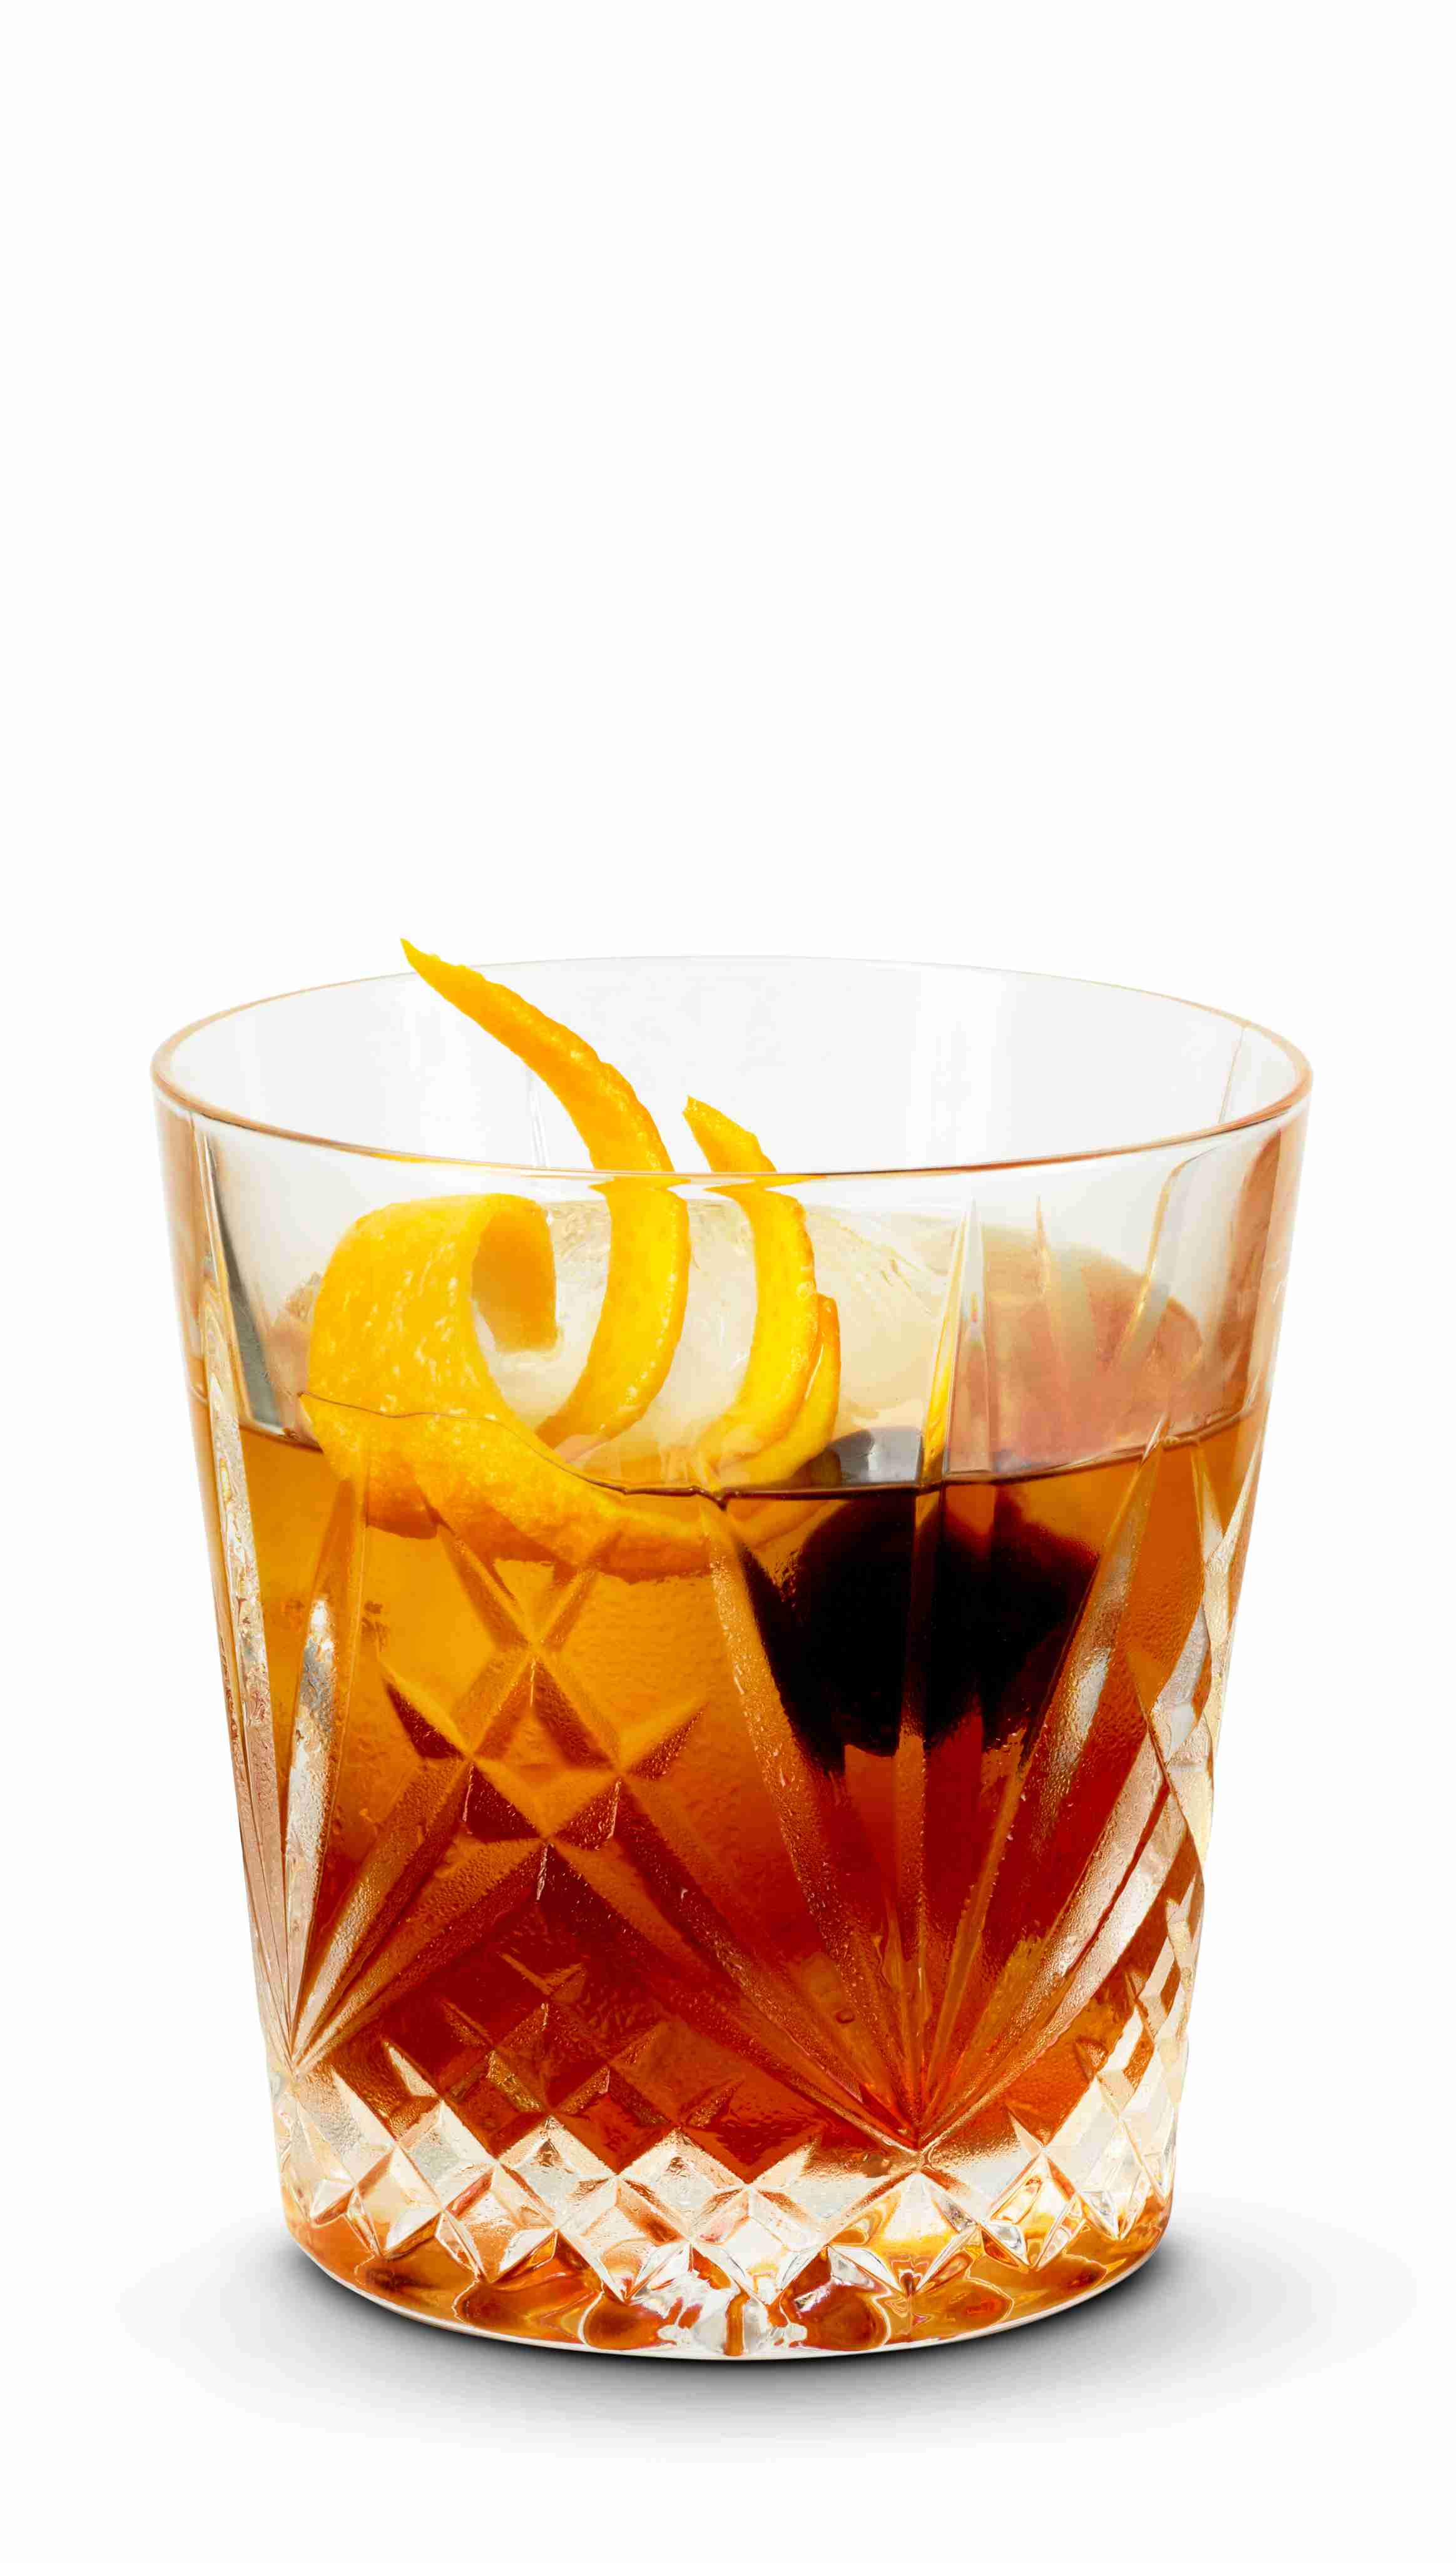 Smoked Old Fashioned Cocktail Recipe